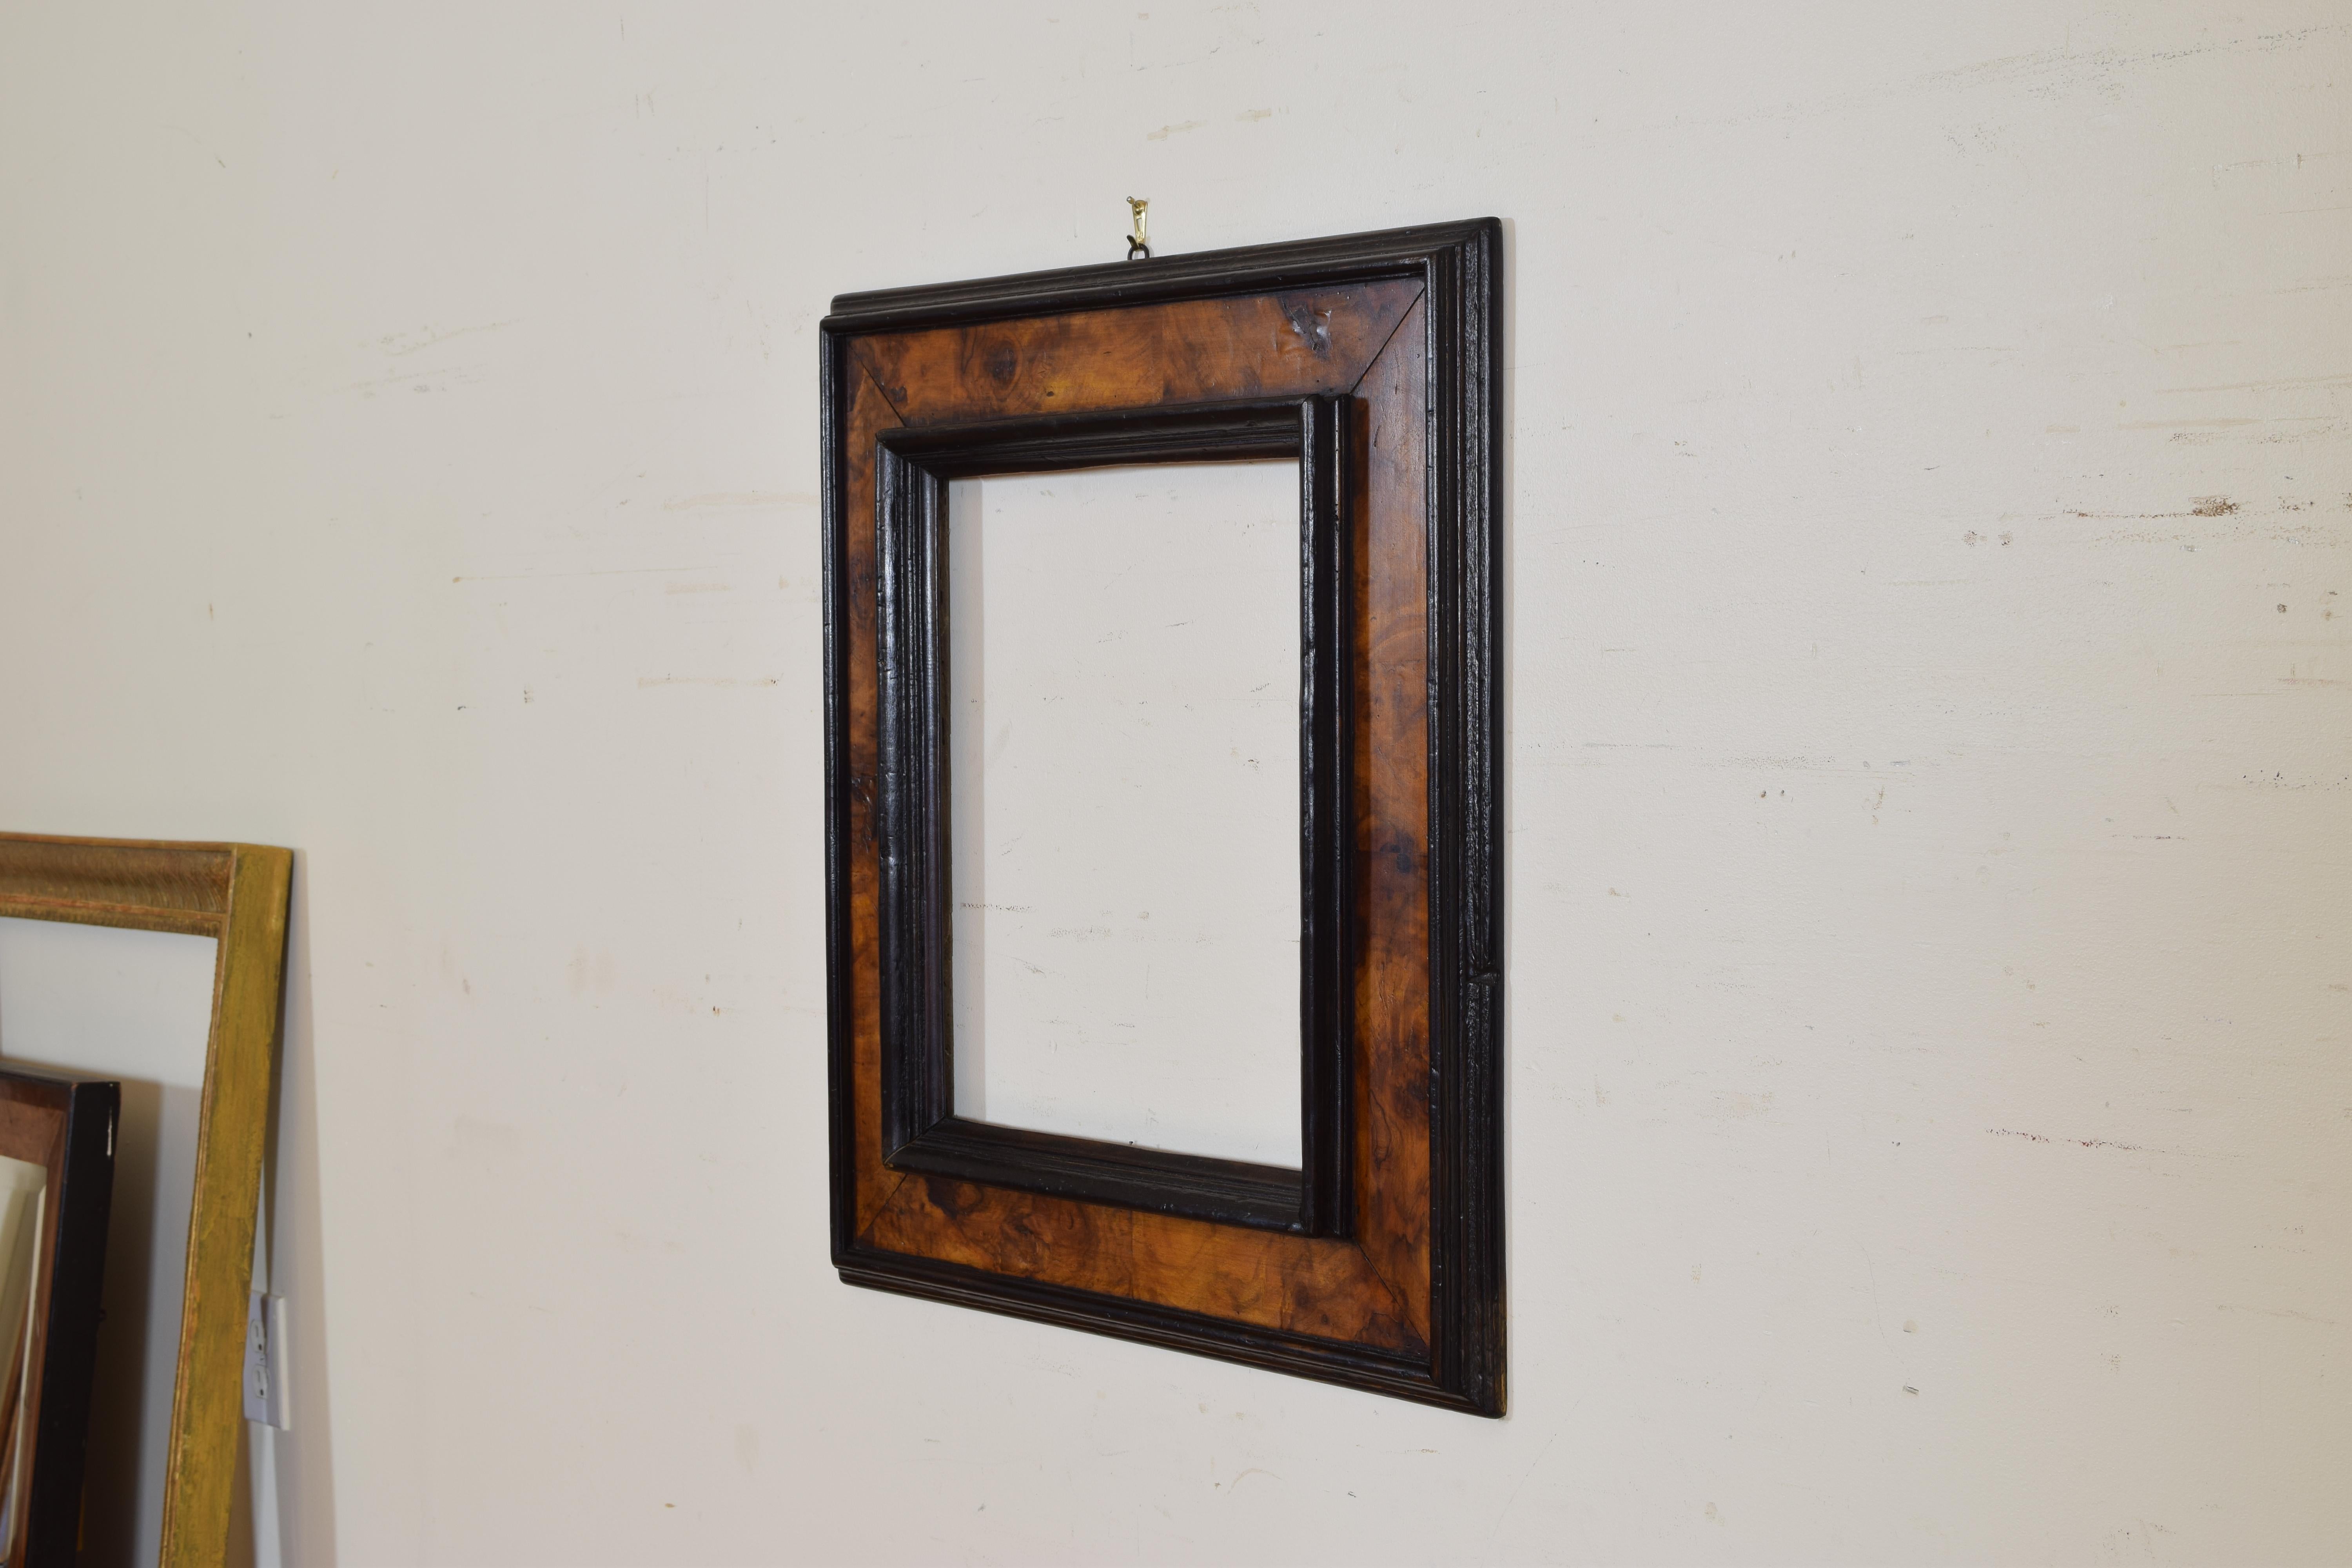 Having exterior and inner ebonized moldings, the surface veneered in olivewood.